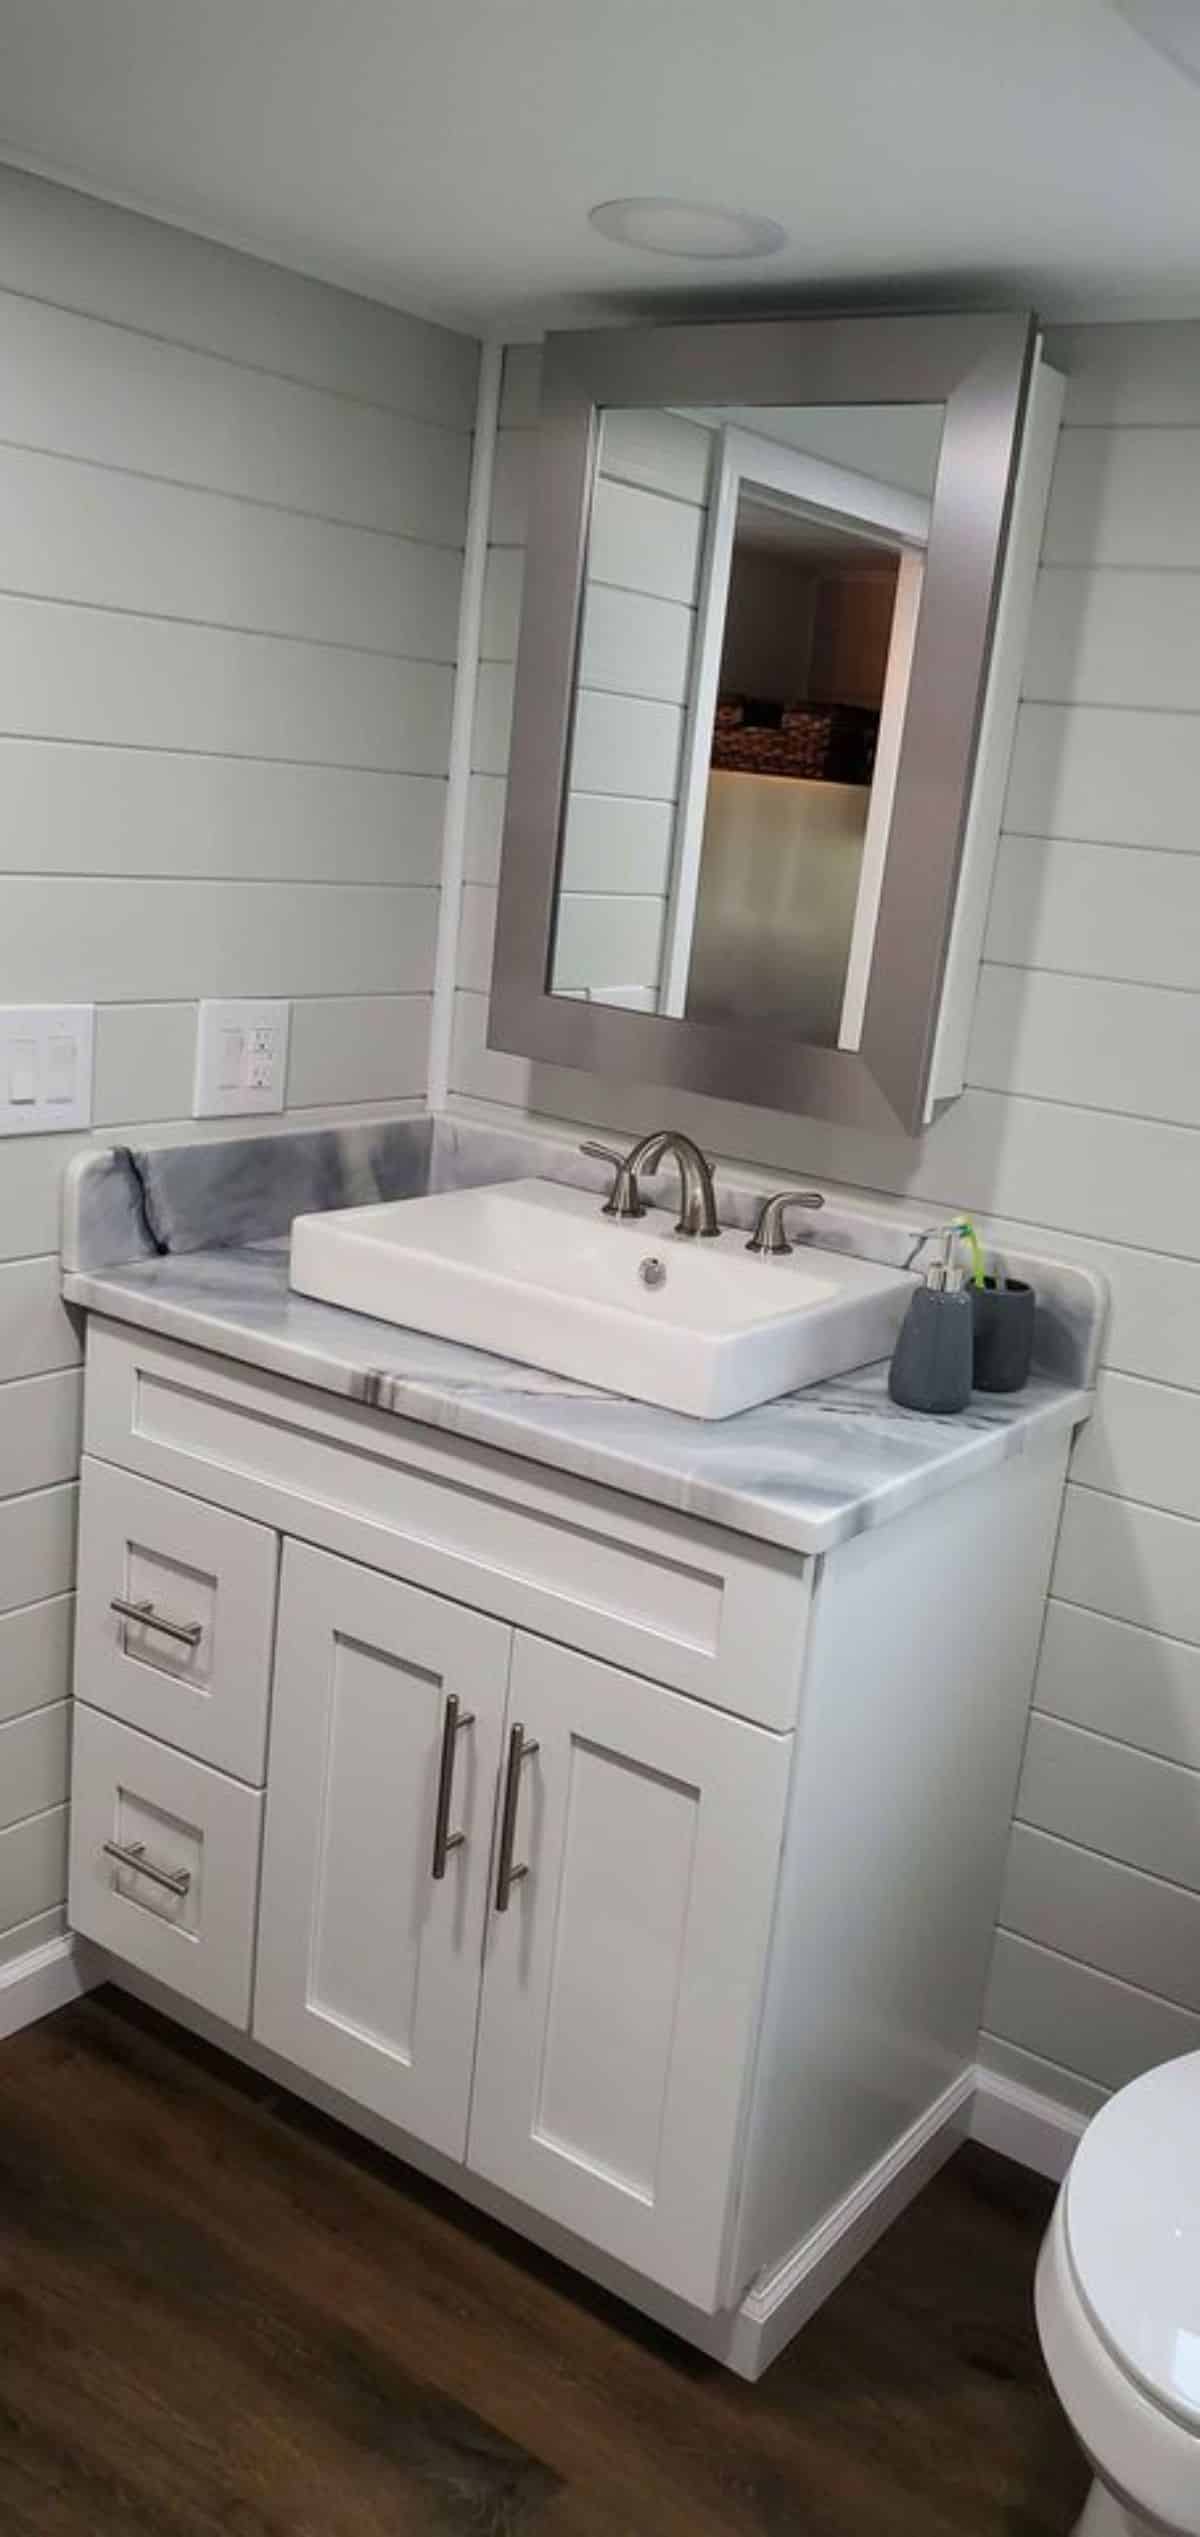 Sink with vanity and mirror in bathroom of 24' Brand New Tiny Home